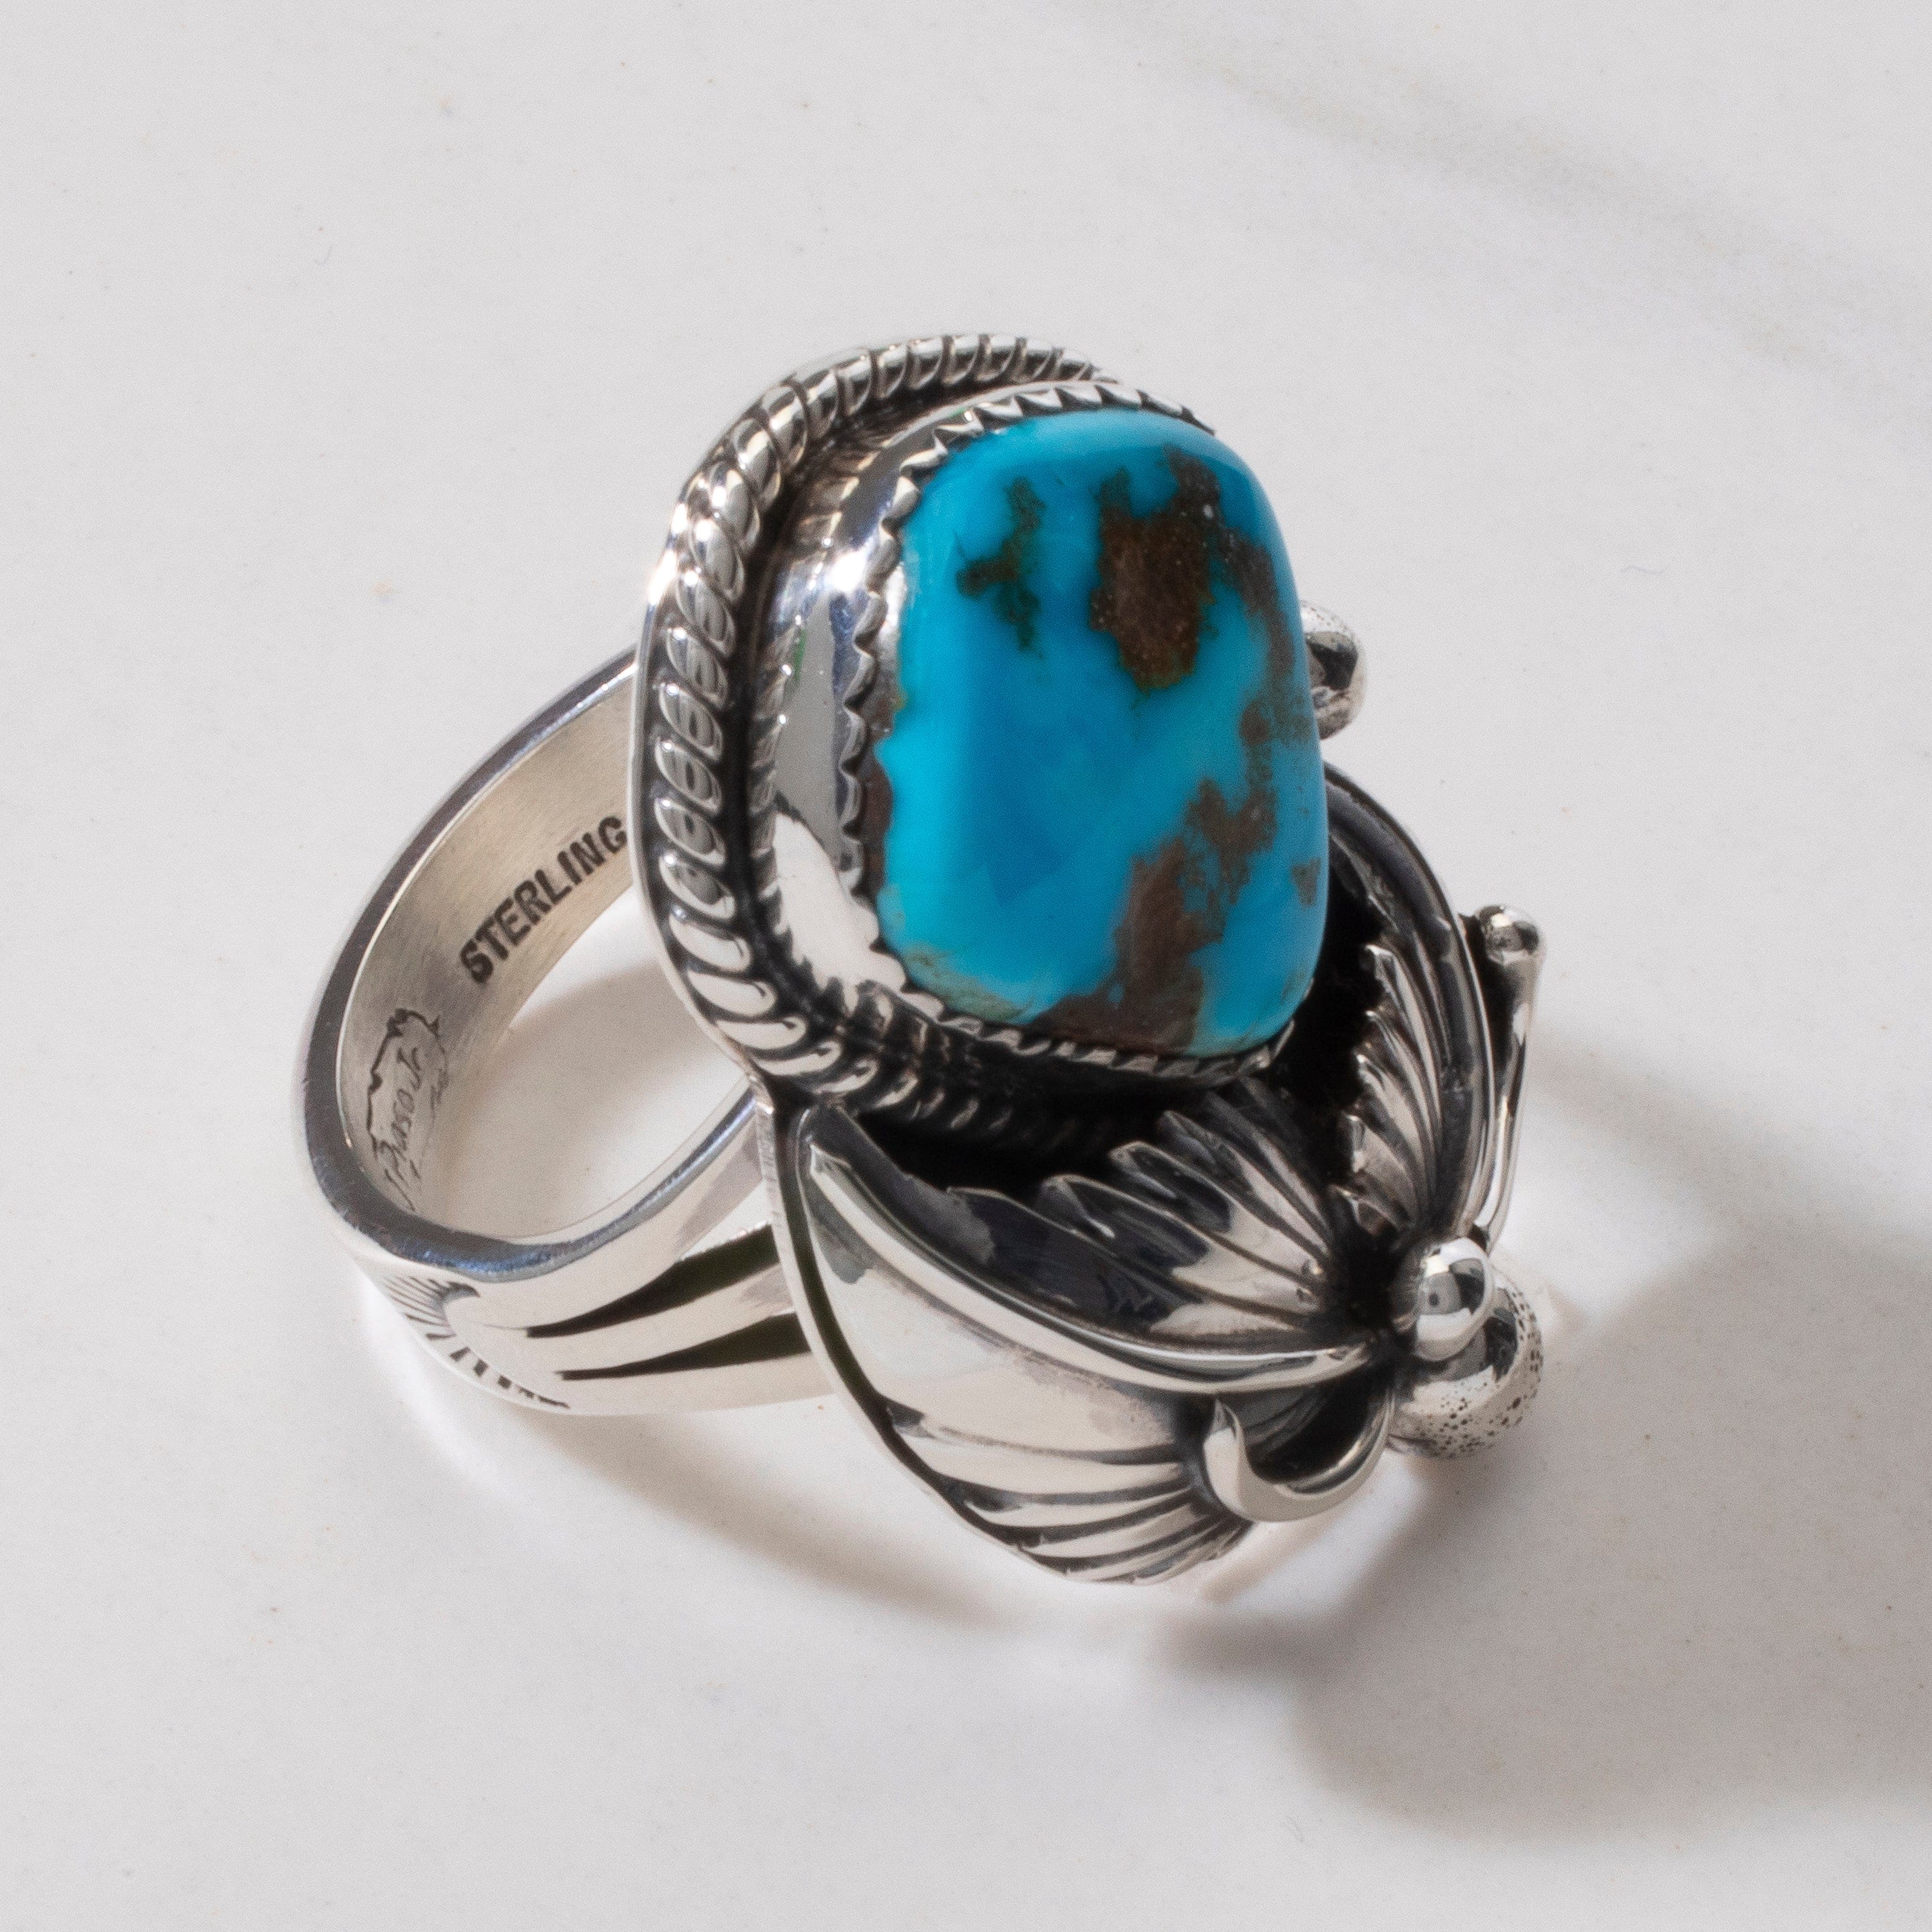 Kalifano Native American Jewelry 8 Joe Piaso Jr. Sleeping Beauty Turquoise Feather Navajo USA Native American Made 925 Sterling Silver Ring NAR700.042.8